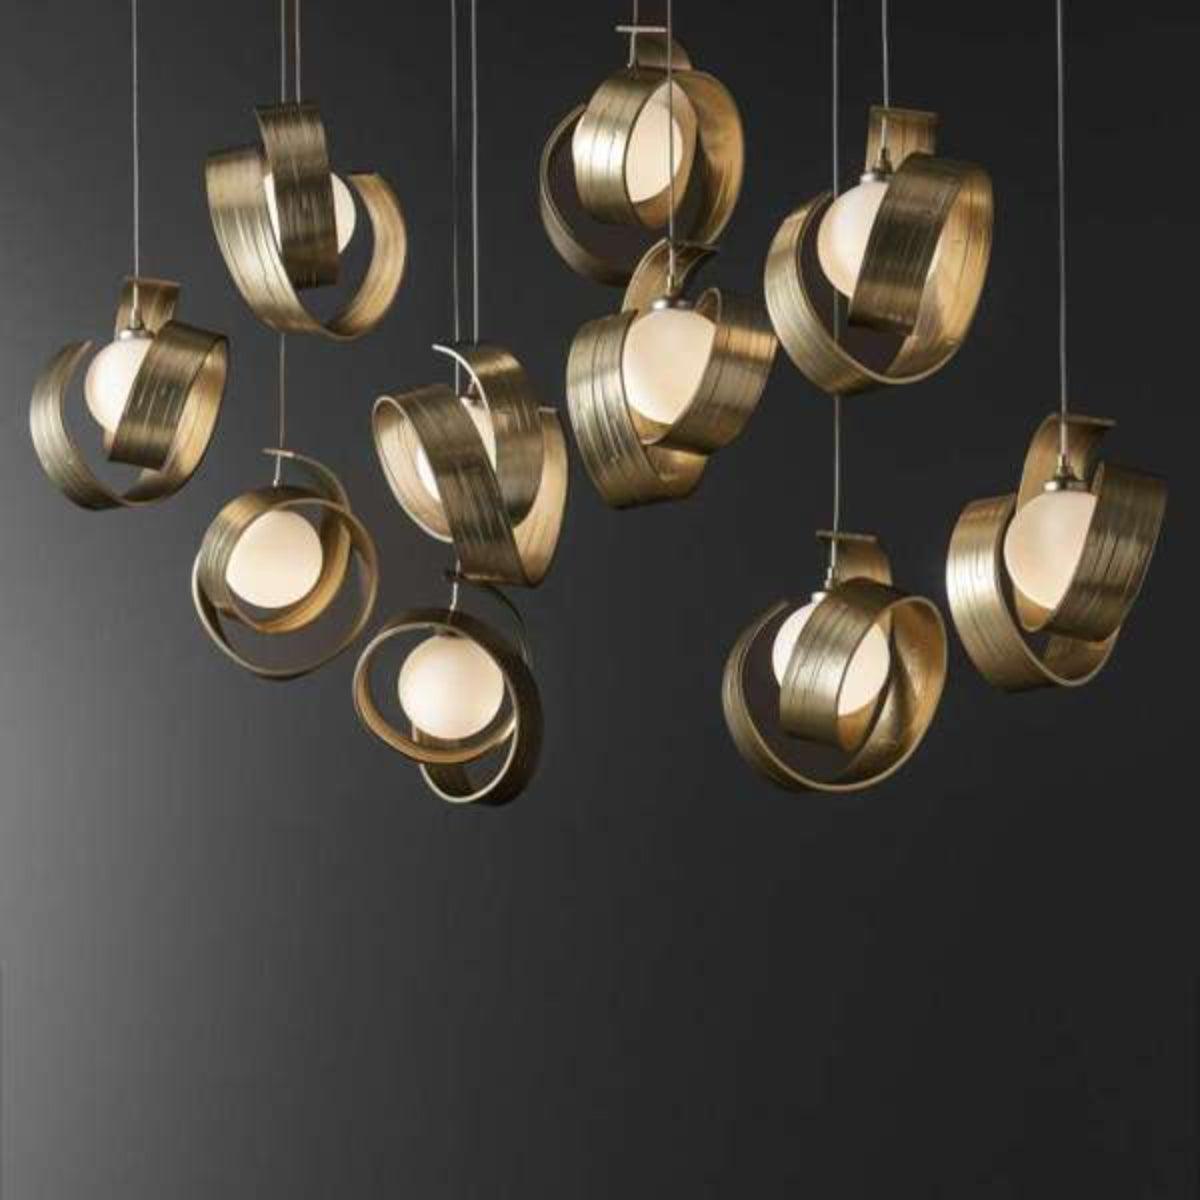 Riza 47 in. 10 lights Linear Pendant Light with Long Height